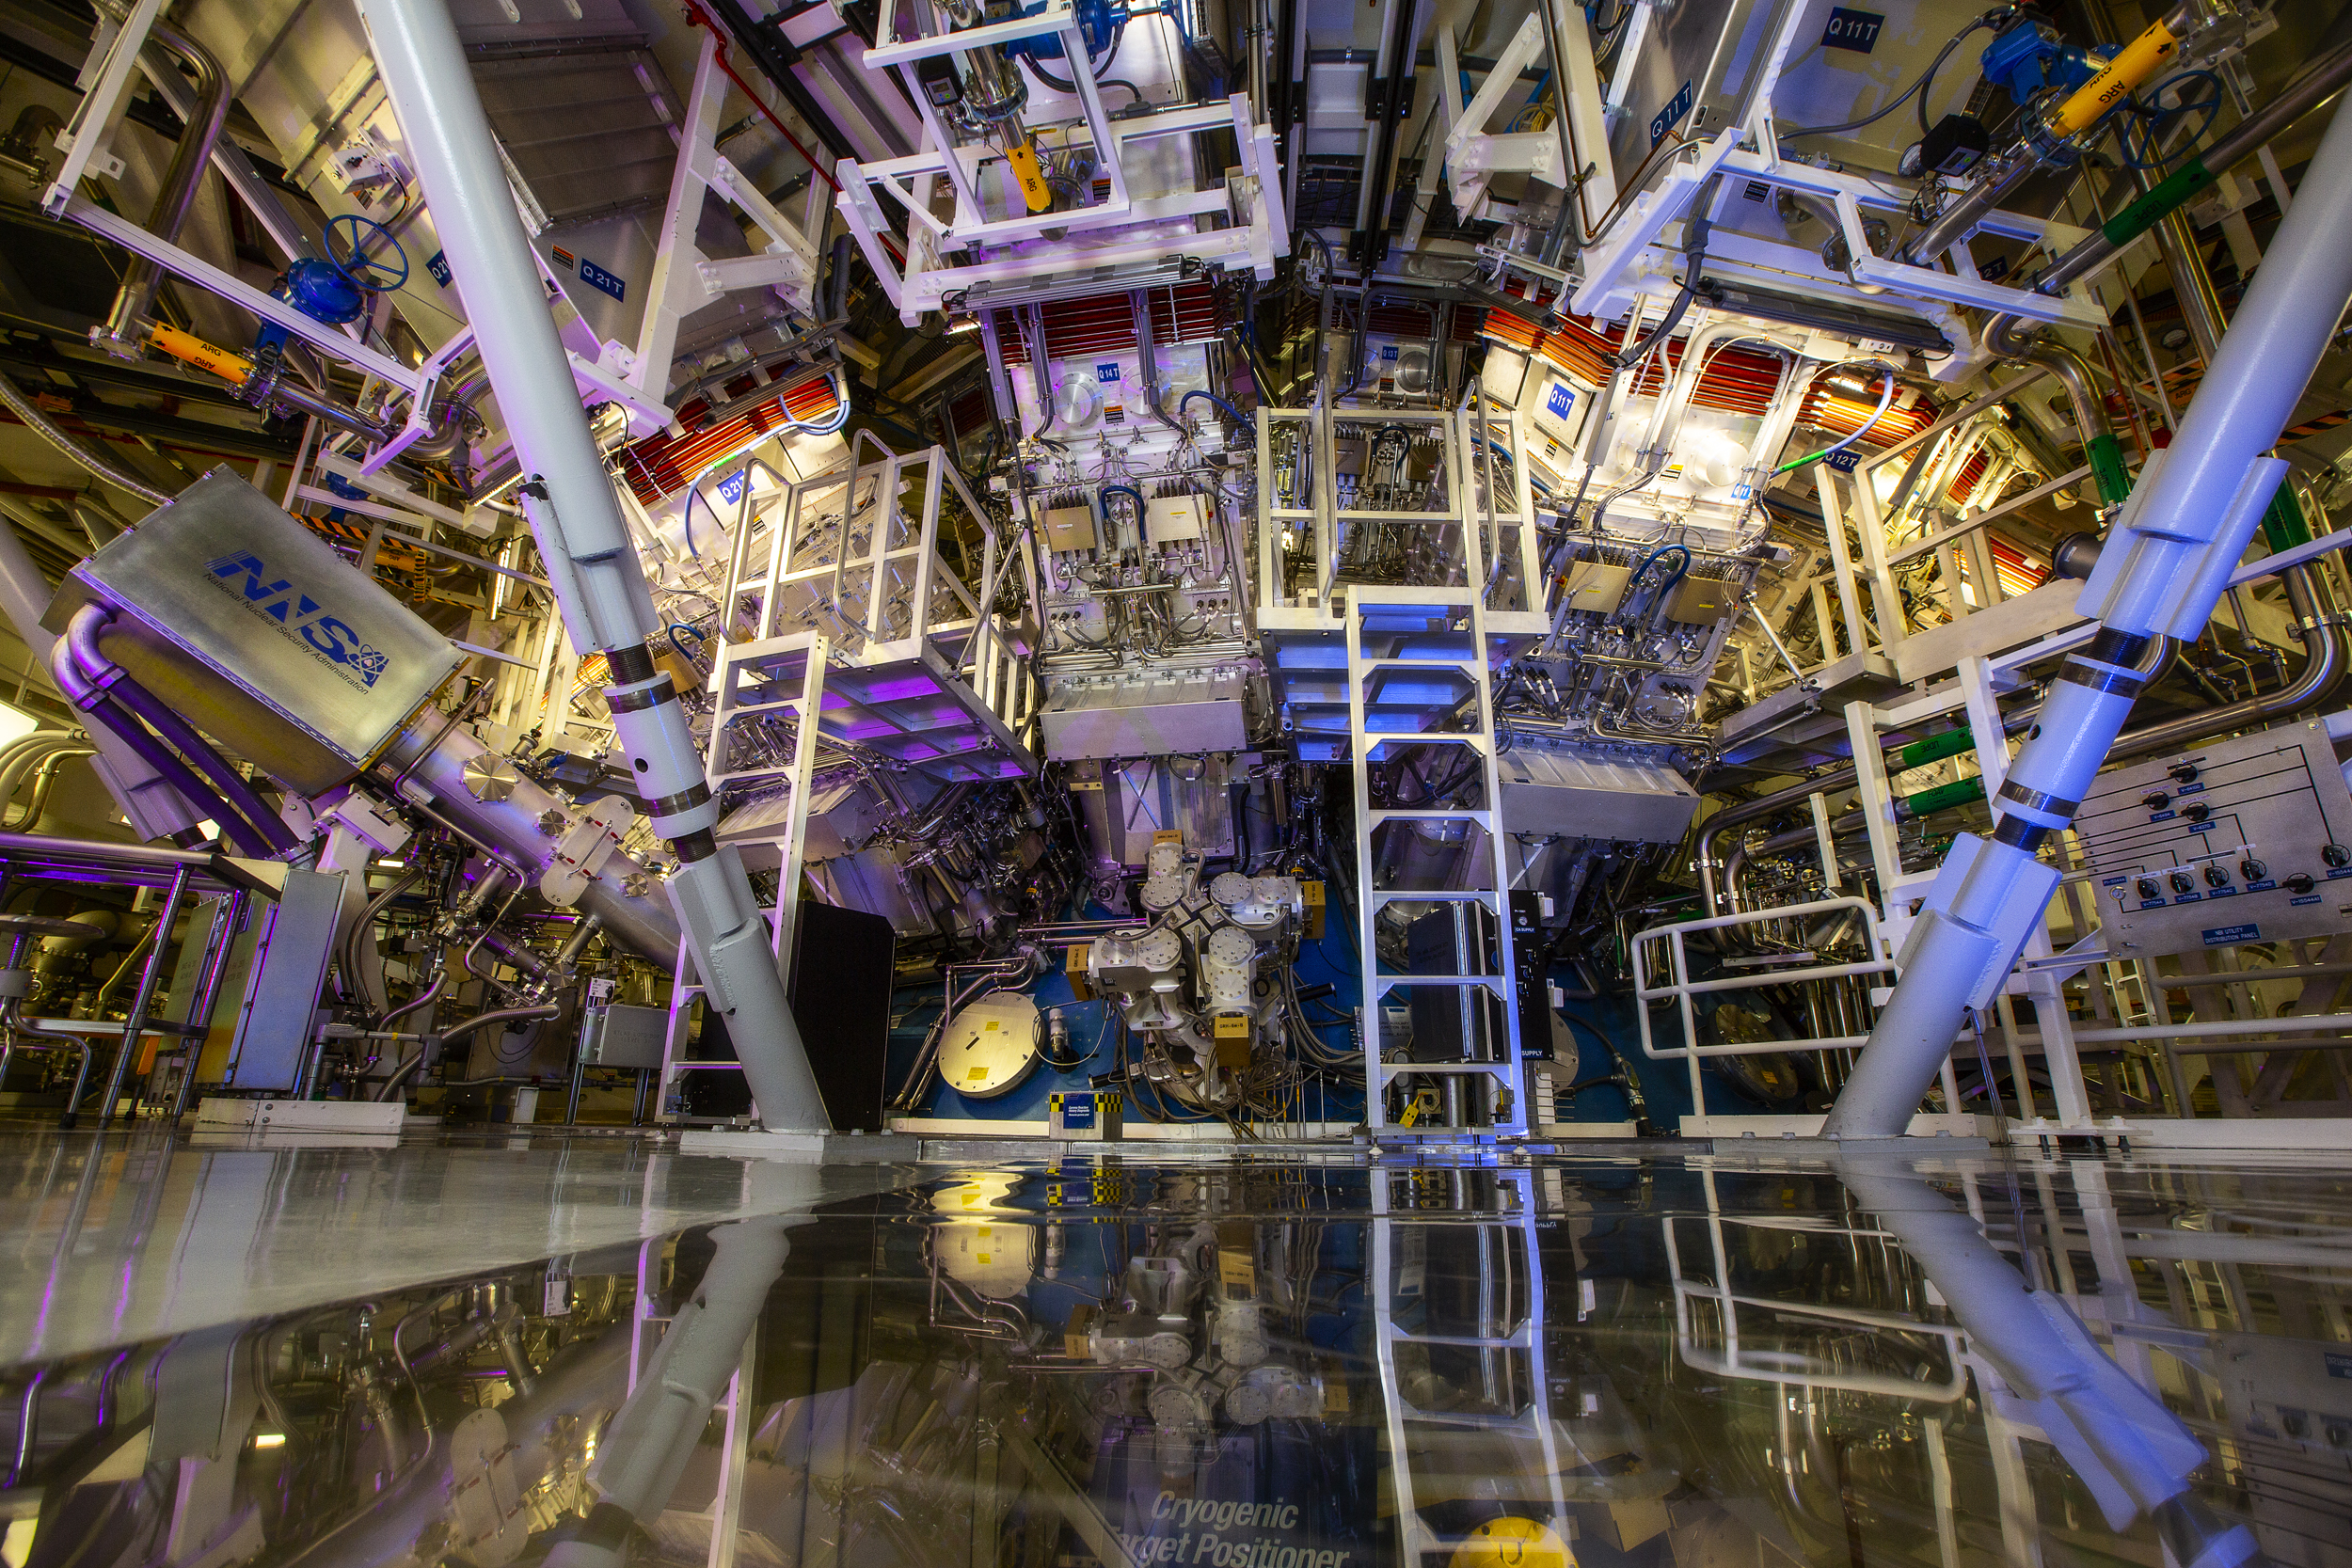 Inside a science laboratory: Gigantic metal structures with ladders leading up to various platforms. A glow of yellow and blue lights illuminate the area.